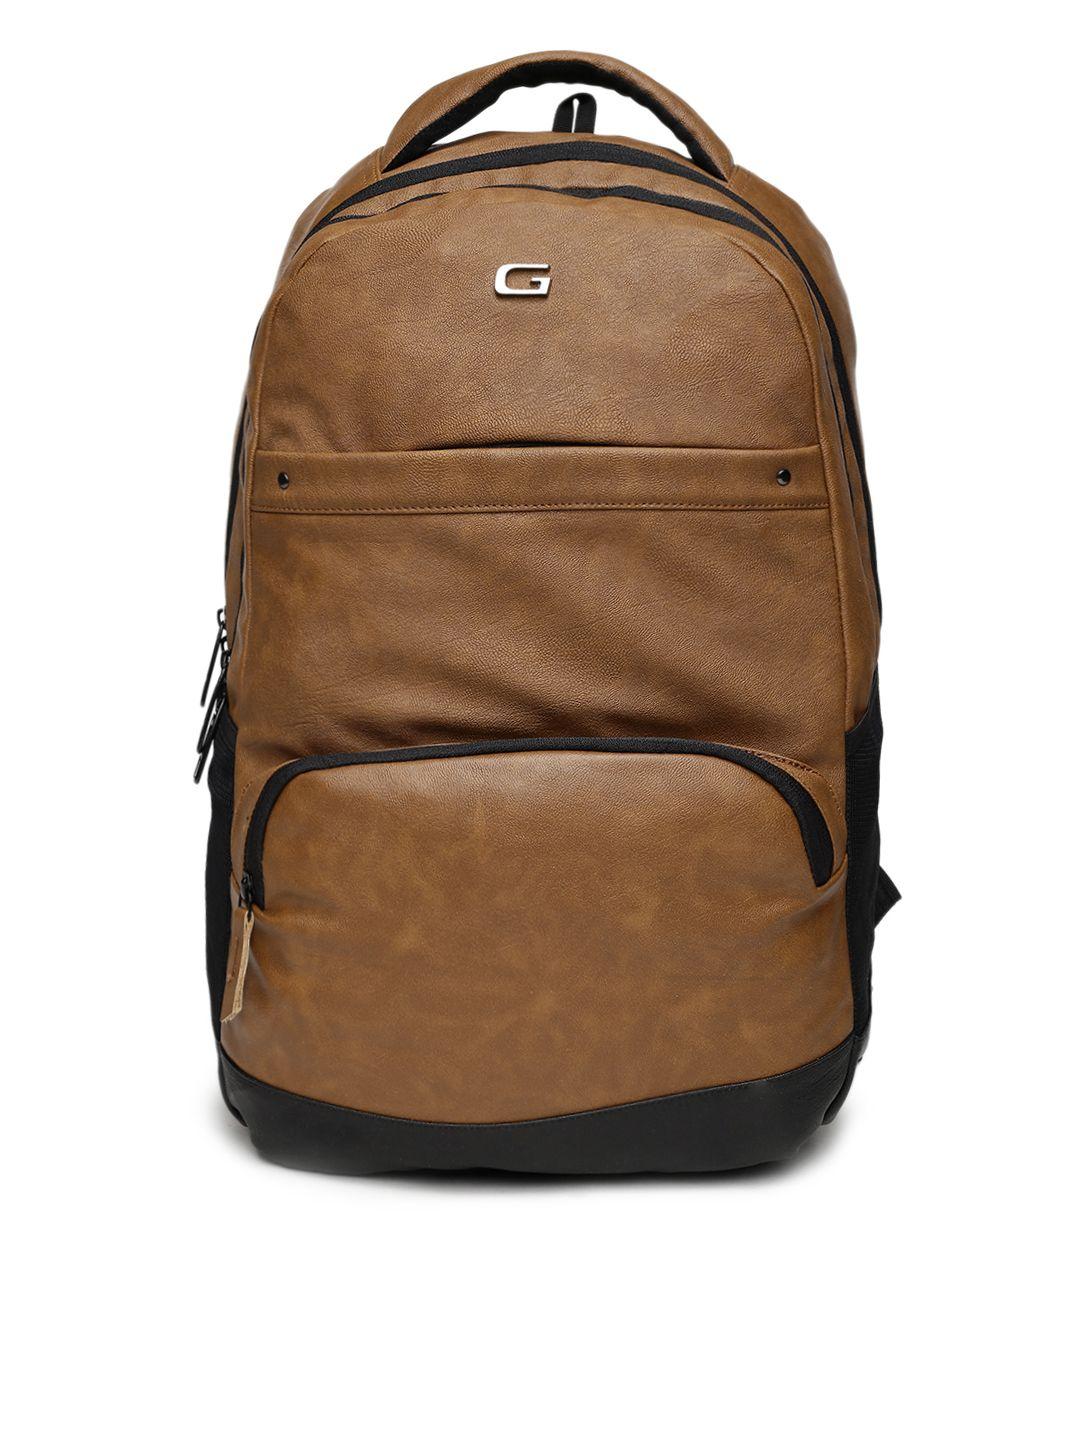 gear unisex brown faux leather solid backpack